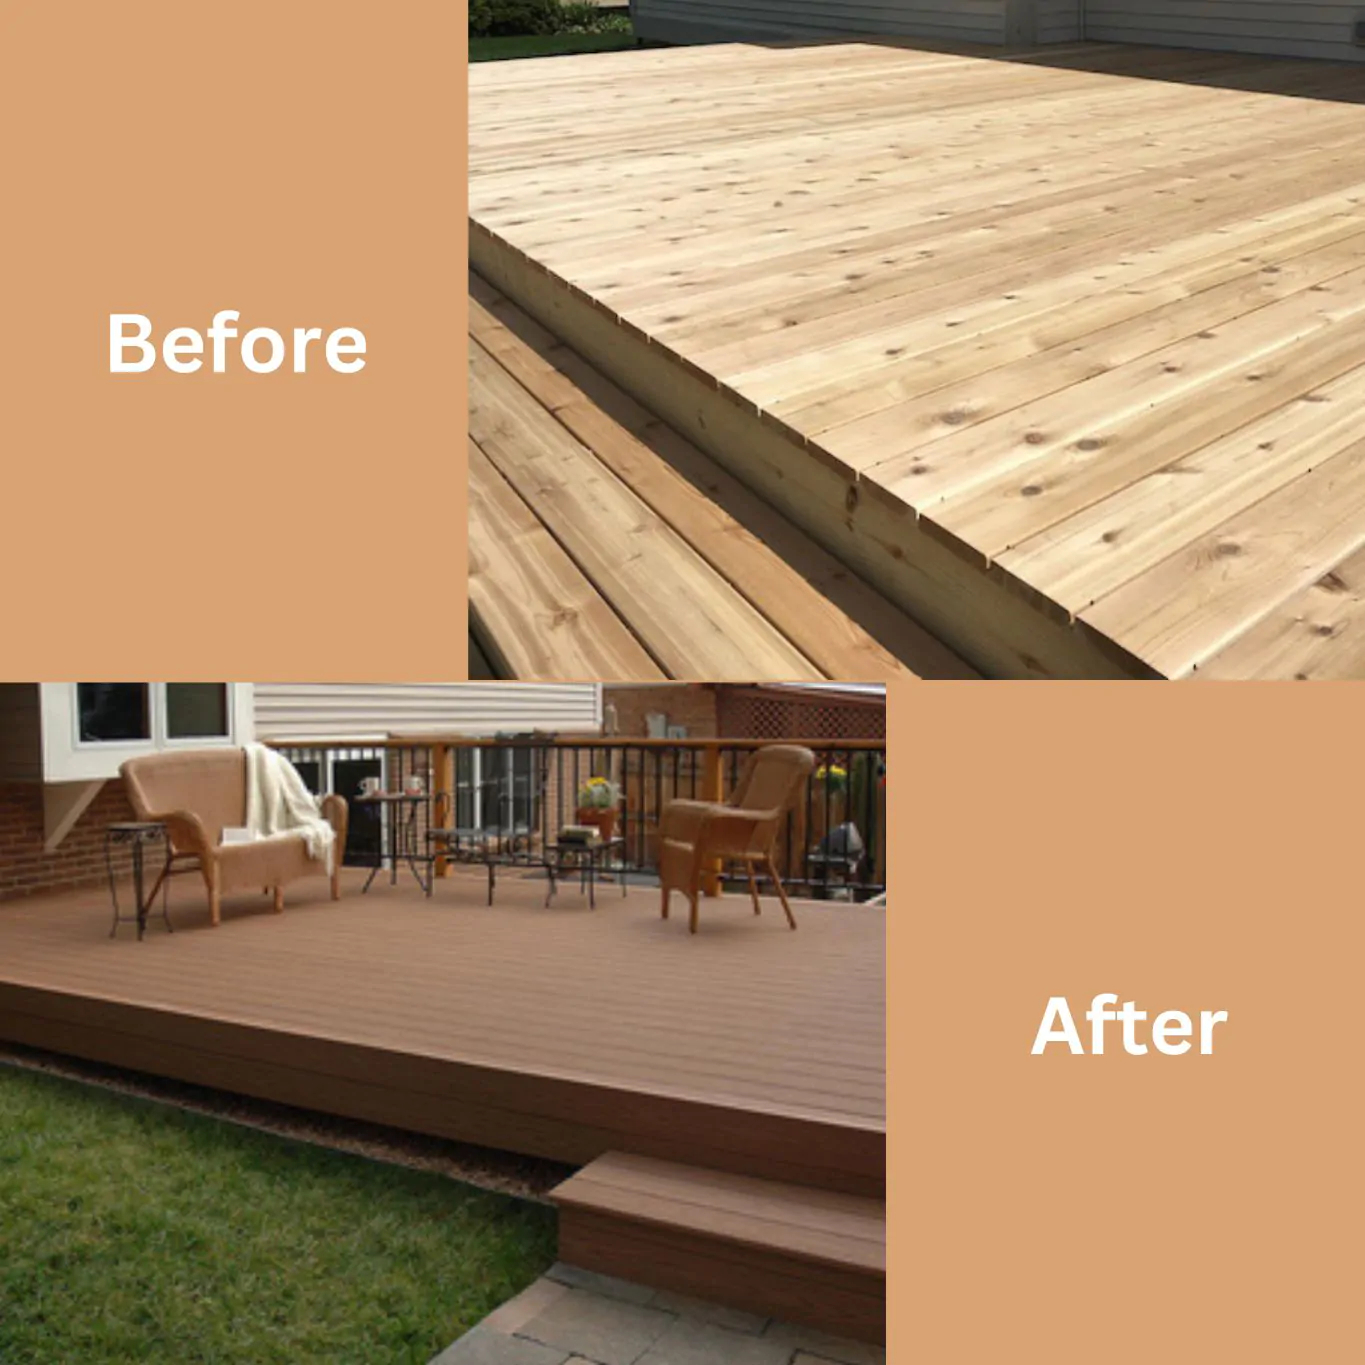 Before and After Deck Design Services - All Pro Cherry Hill Deck Builders